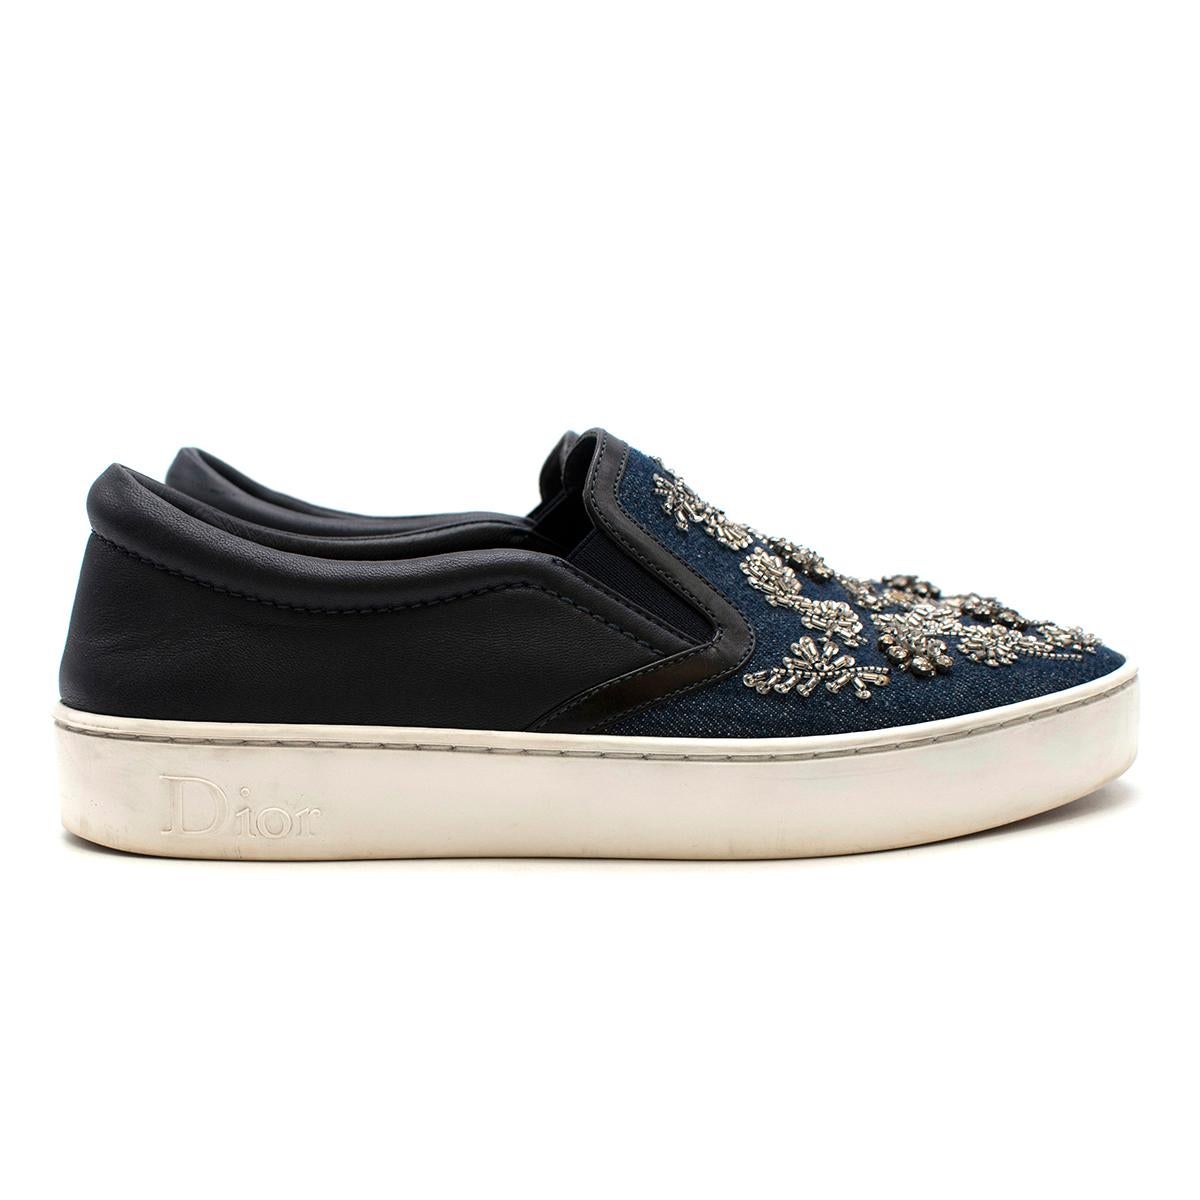 Dior Blue Denim Embellished Slip-on Trainers 

To accompany your attires with ultimate style, Dior brings you this pair of sneakers that speak nothing but fashion and comfort. They've been crafted from indigo dark wash denim with leather trims and